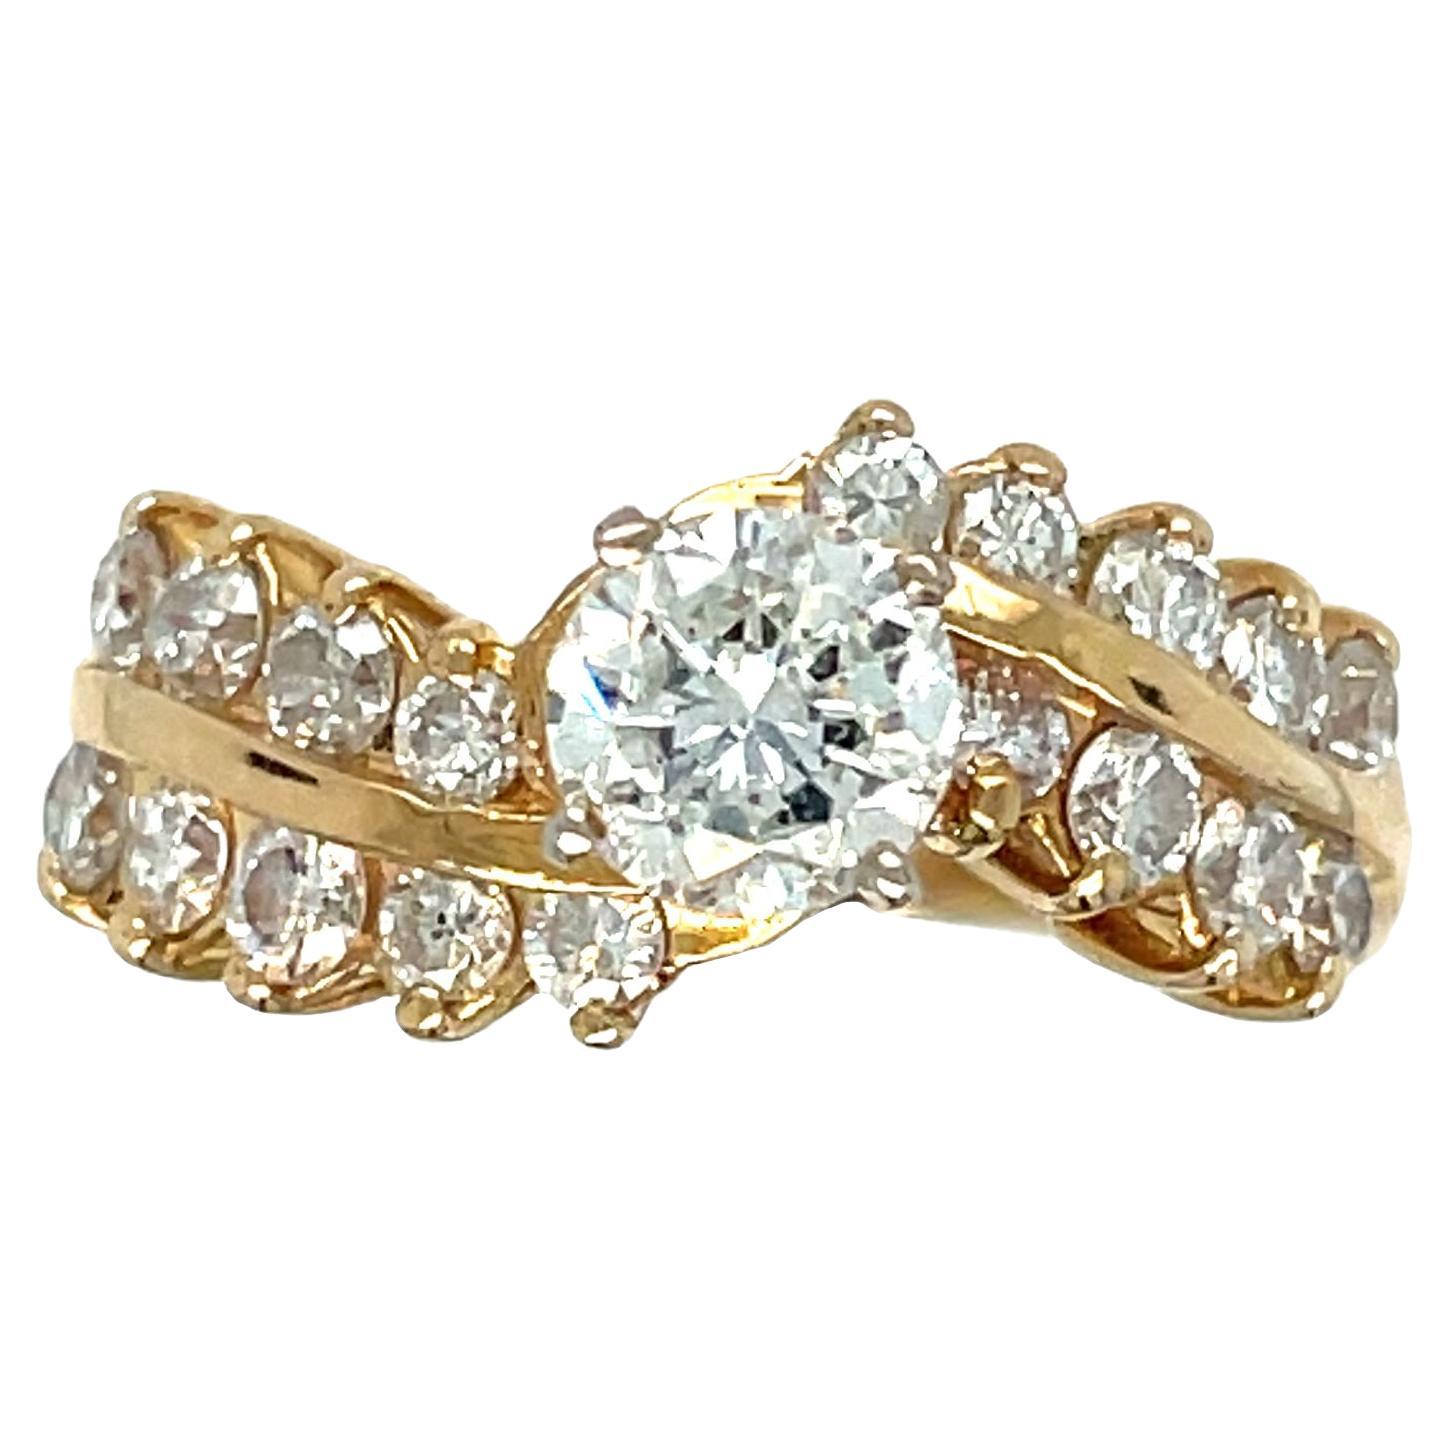 Bypass Diamond Engagement Ring in 14K Yellow Gold